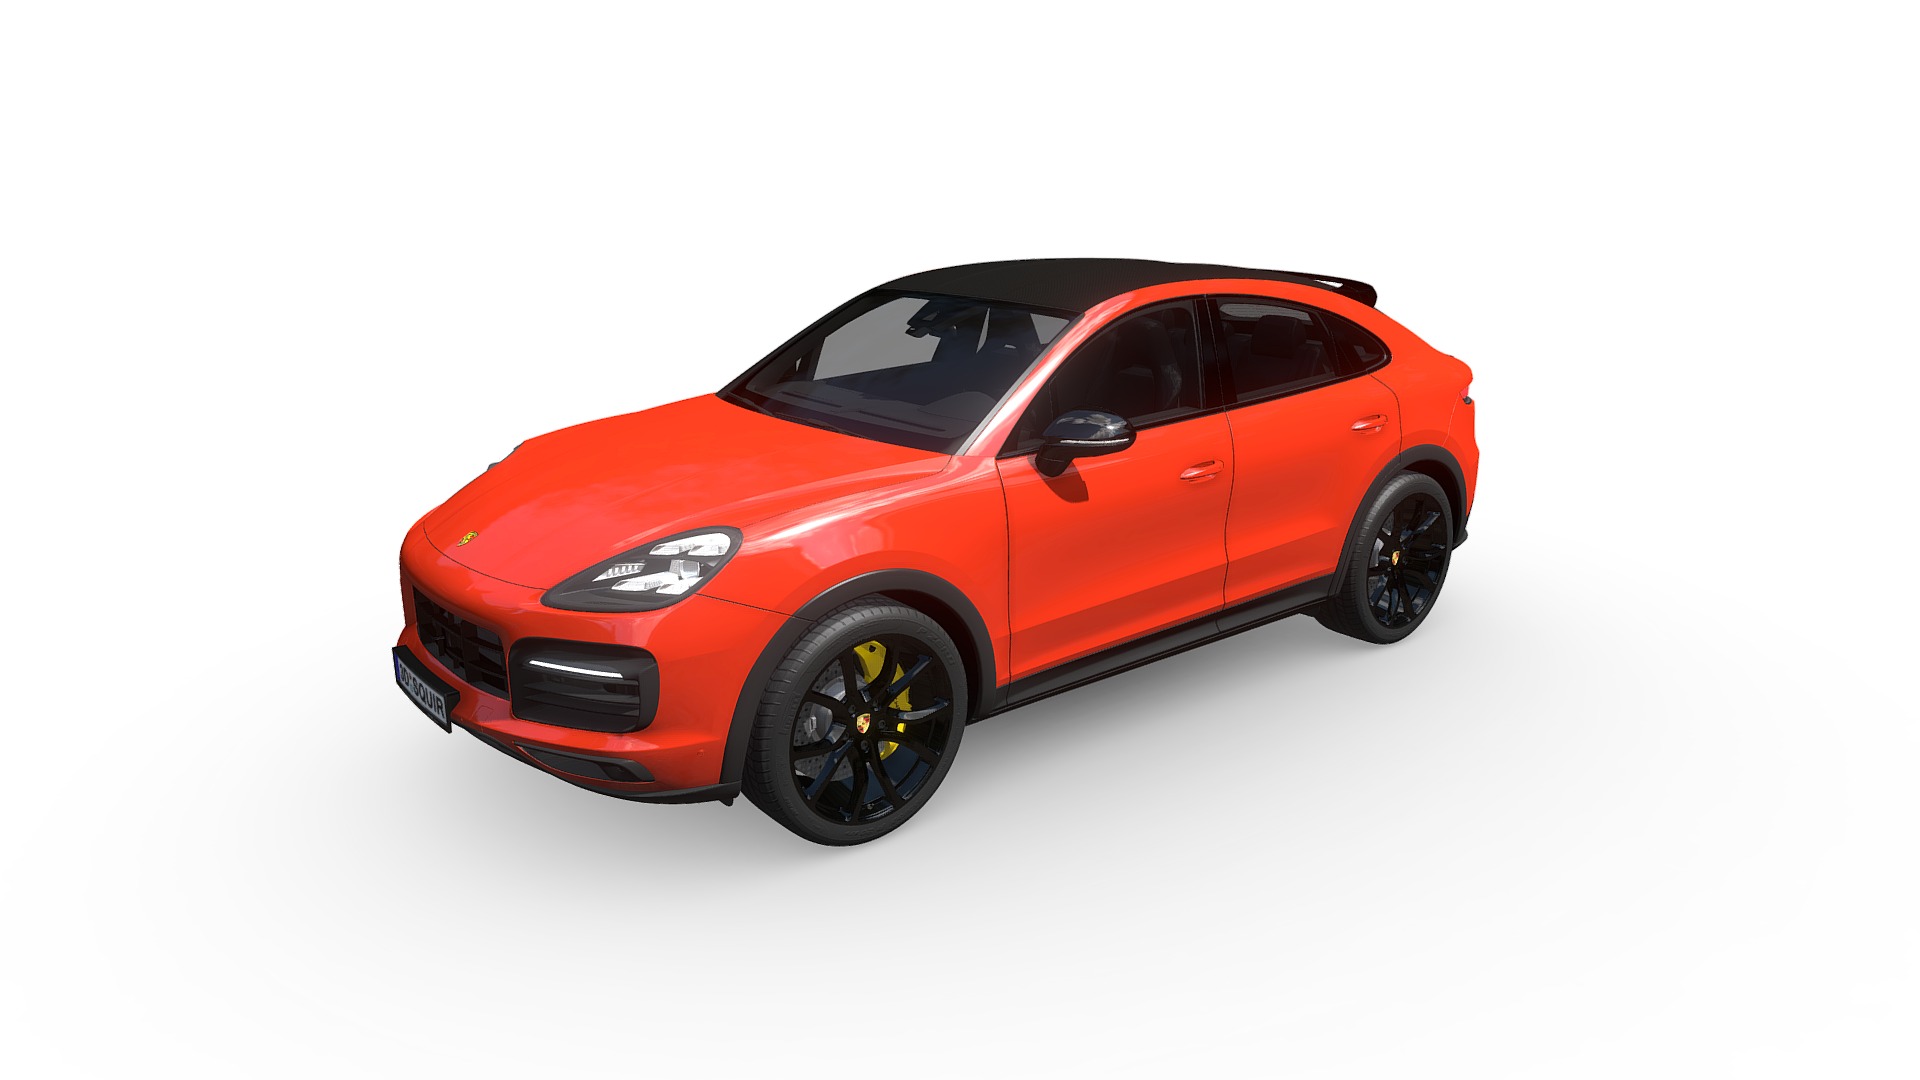 3D model Porsche Cayenne Coupe 2020 - This is a 3D model of the Porsche Cayenne Coupe 2020. The 3D model is about a red car with black wheels.